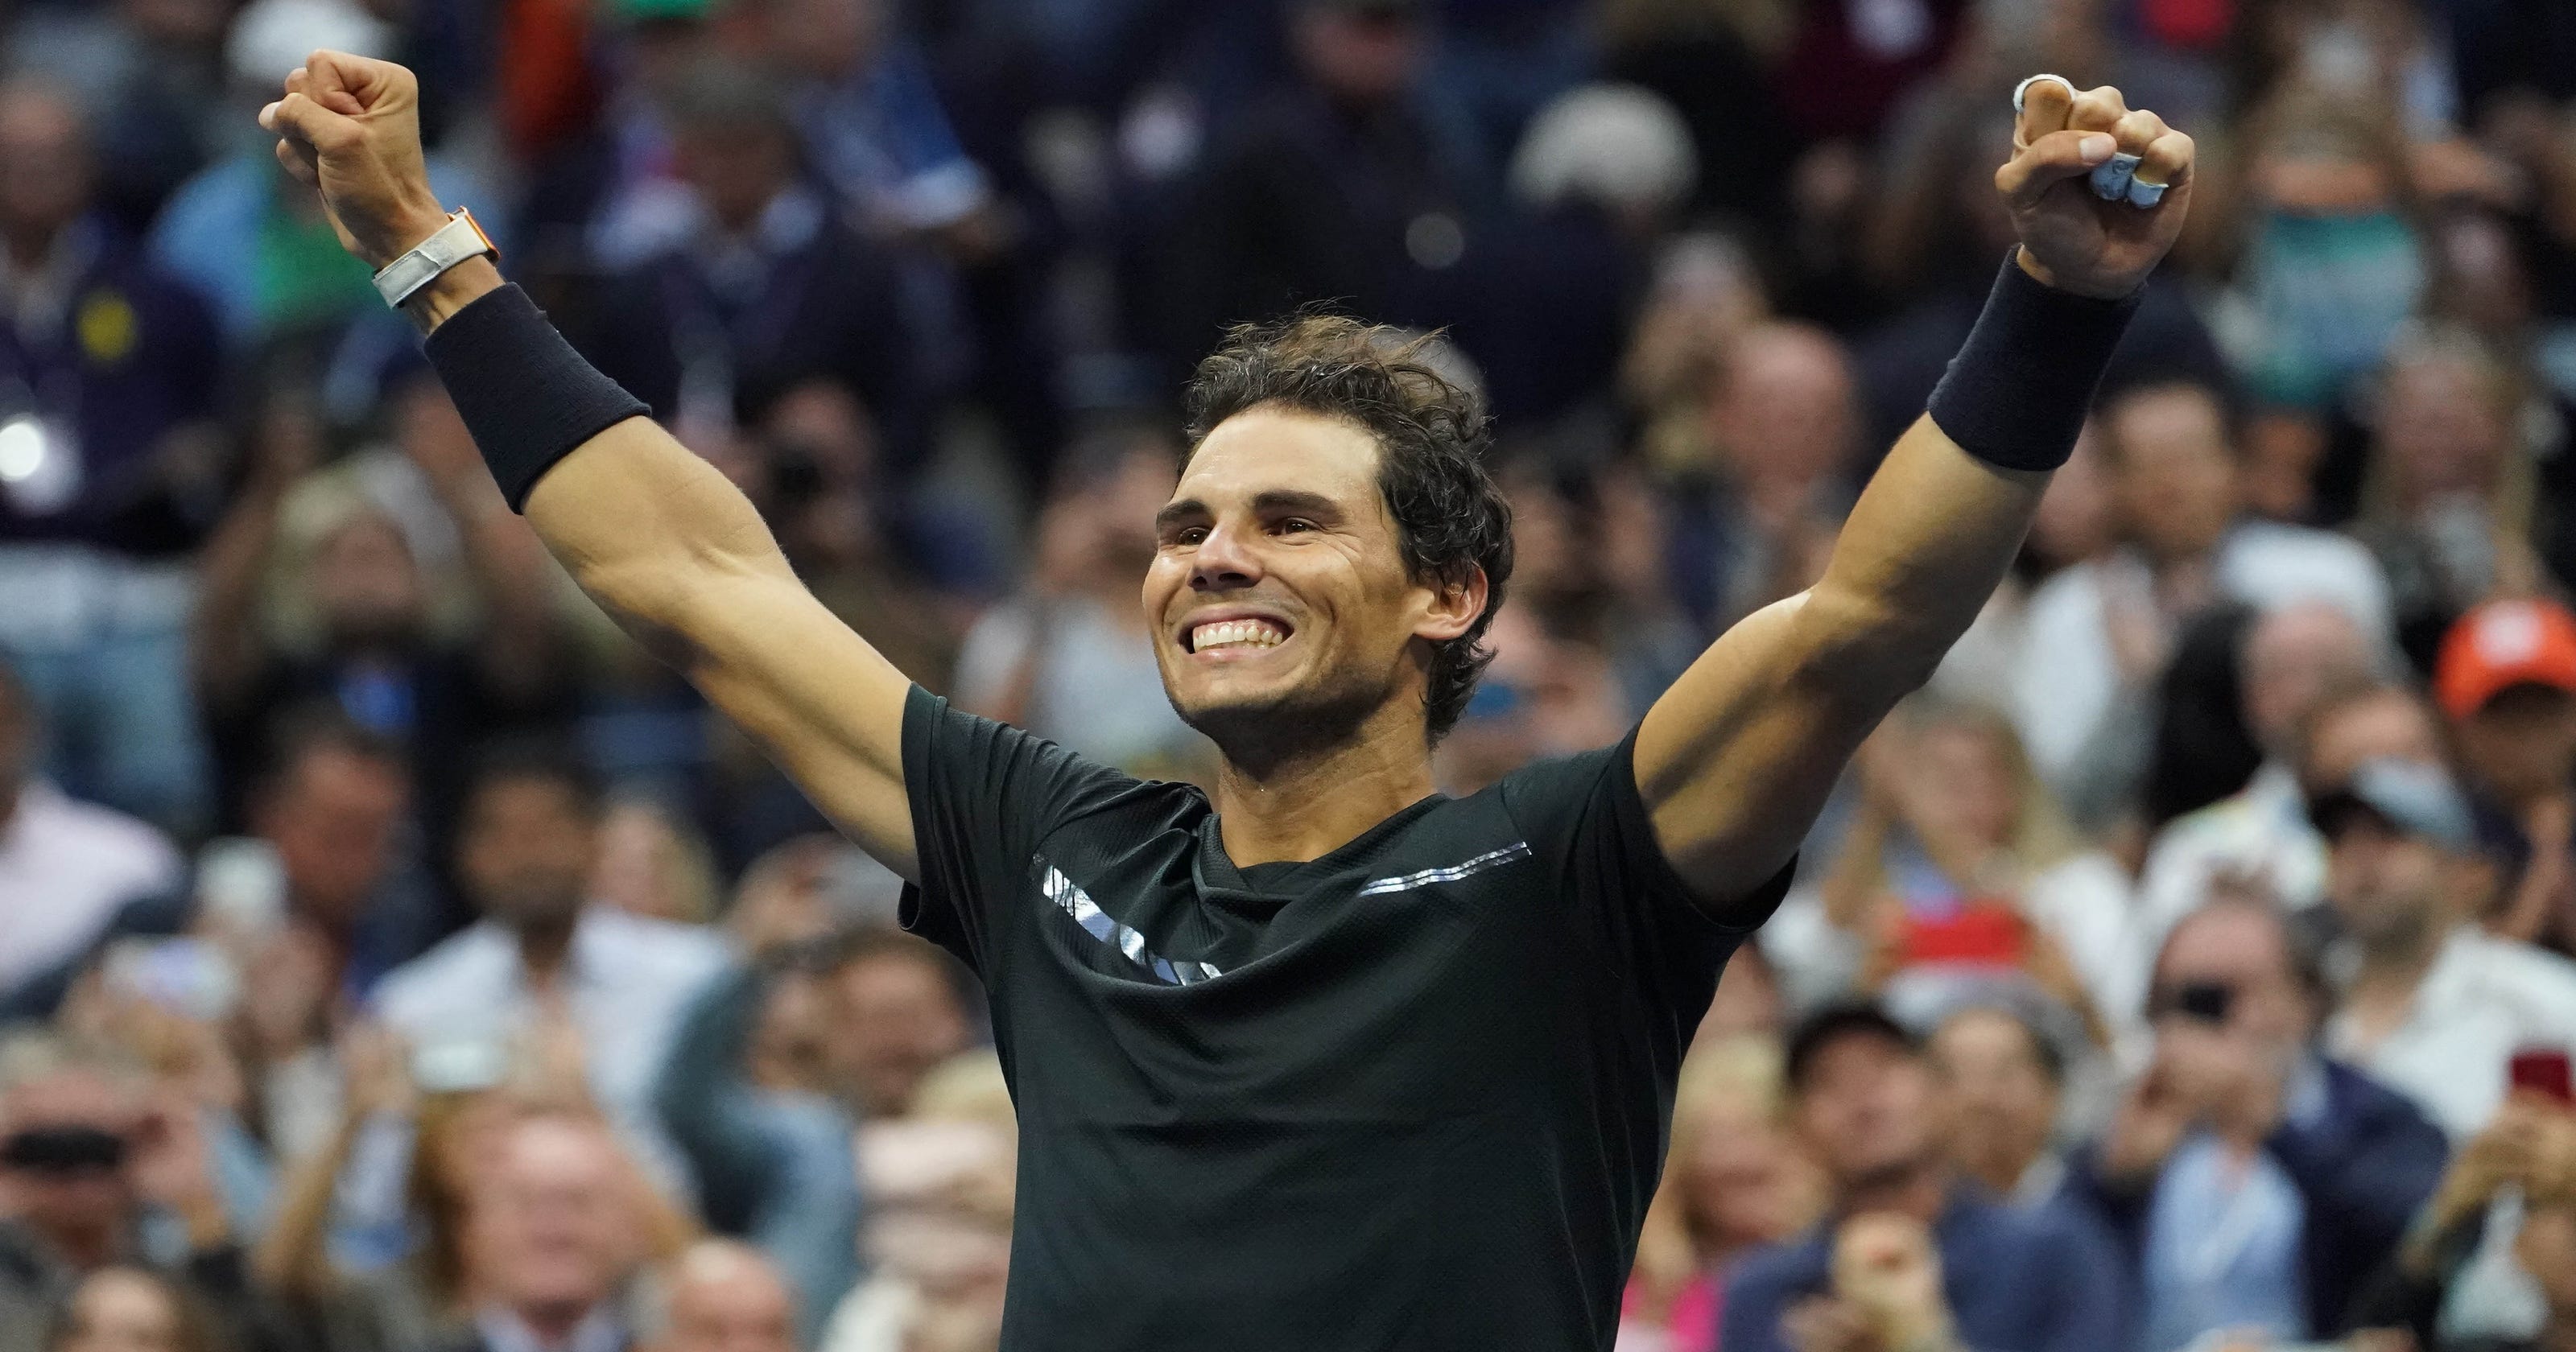 Rafael Nadal shows sympathy for world victims after U.S. Open win3200 x 1680